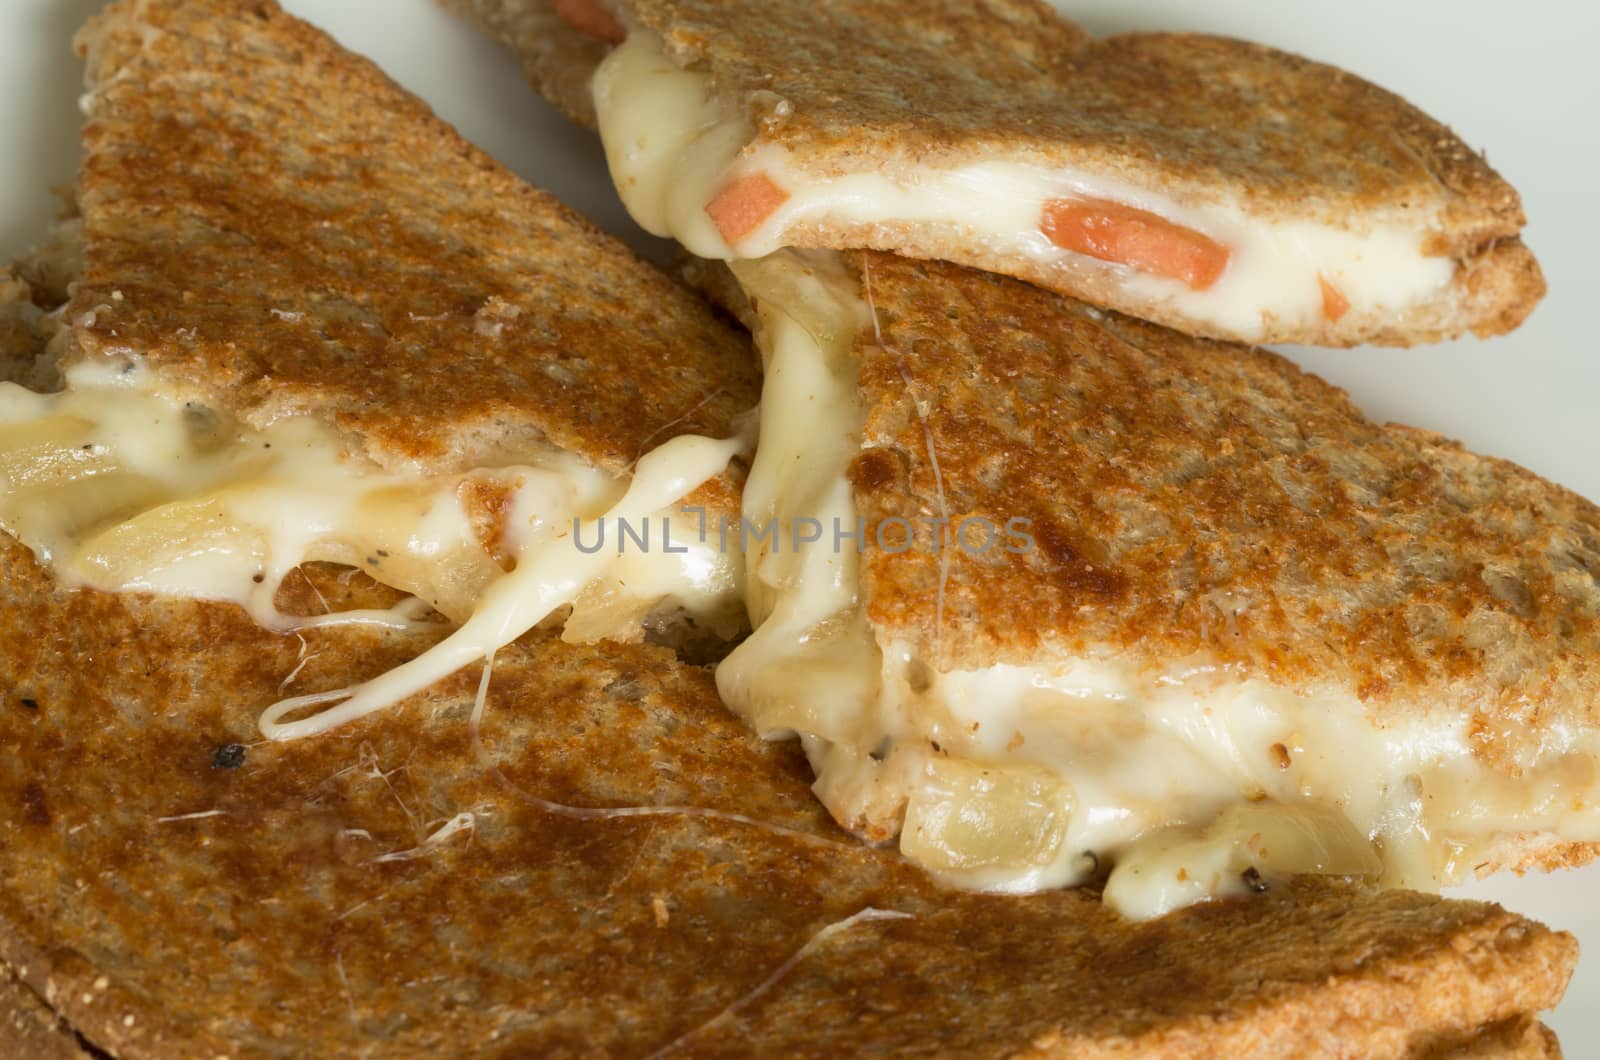 American grilled cheese sandwiches by daoleduc